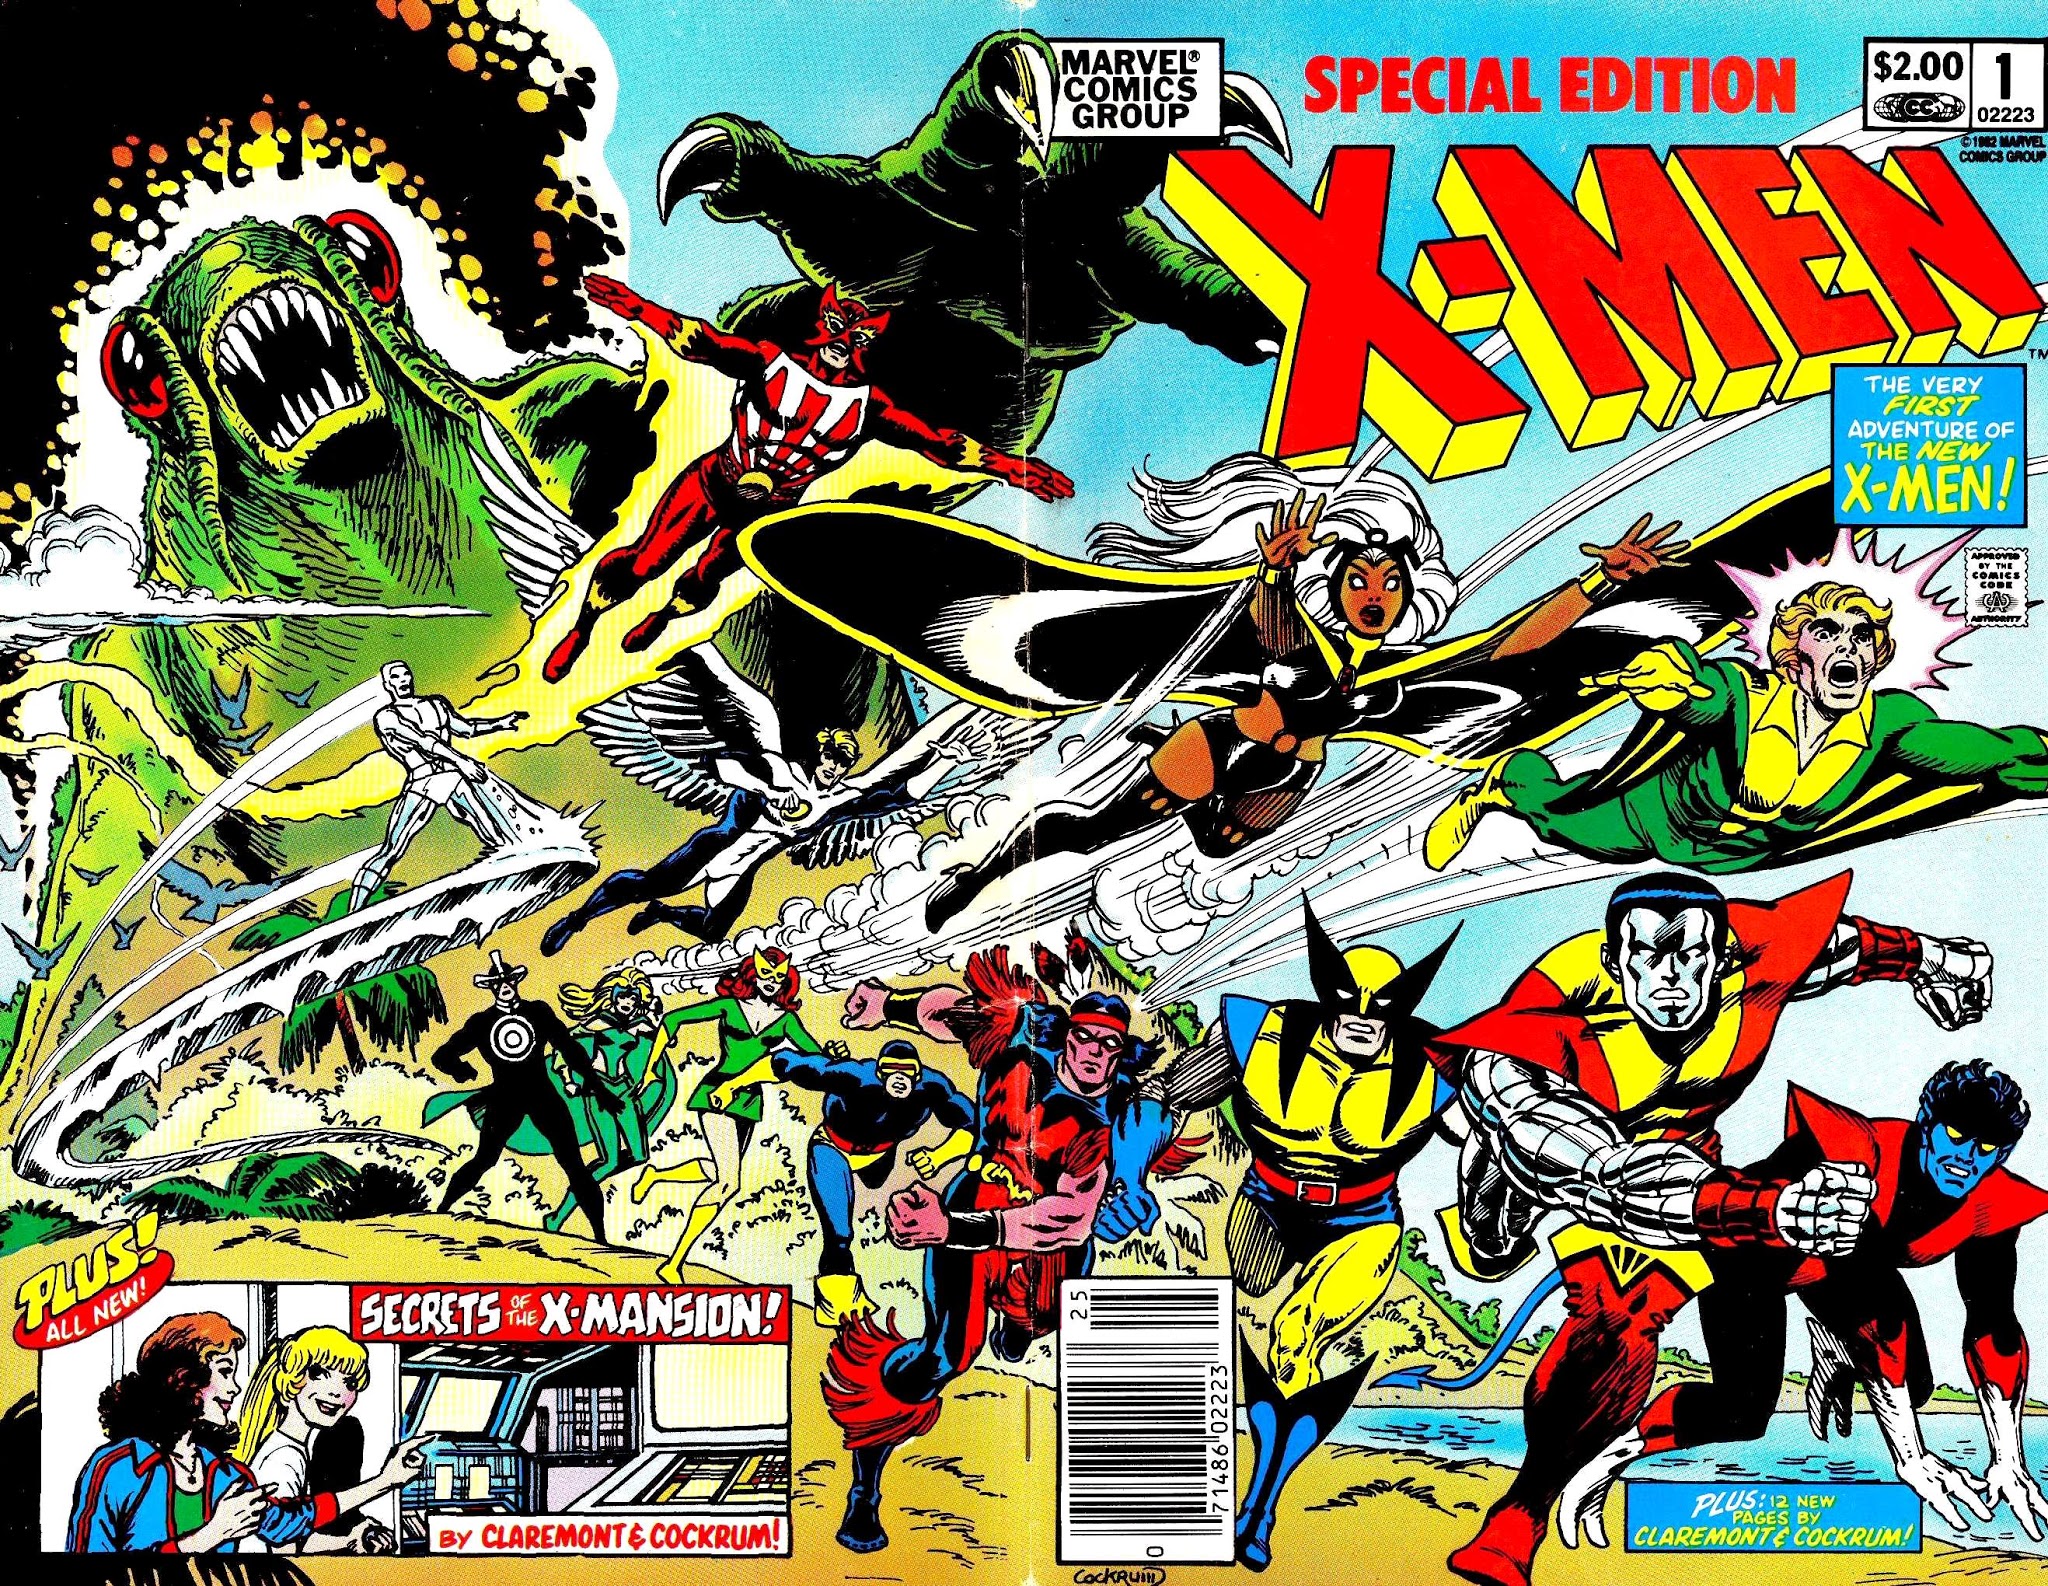 Read online Special Edition X-Men comic -  Issue # Full - 1